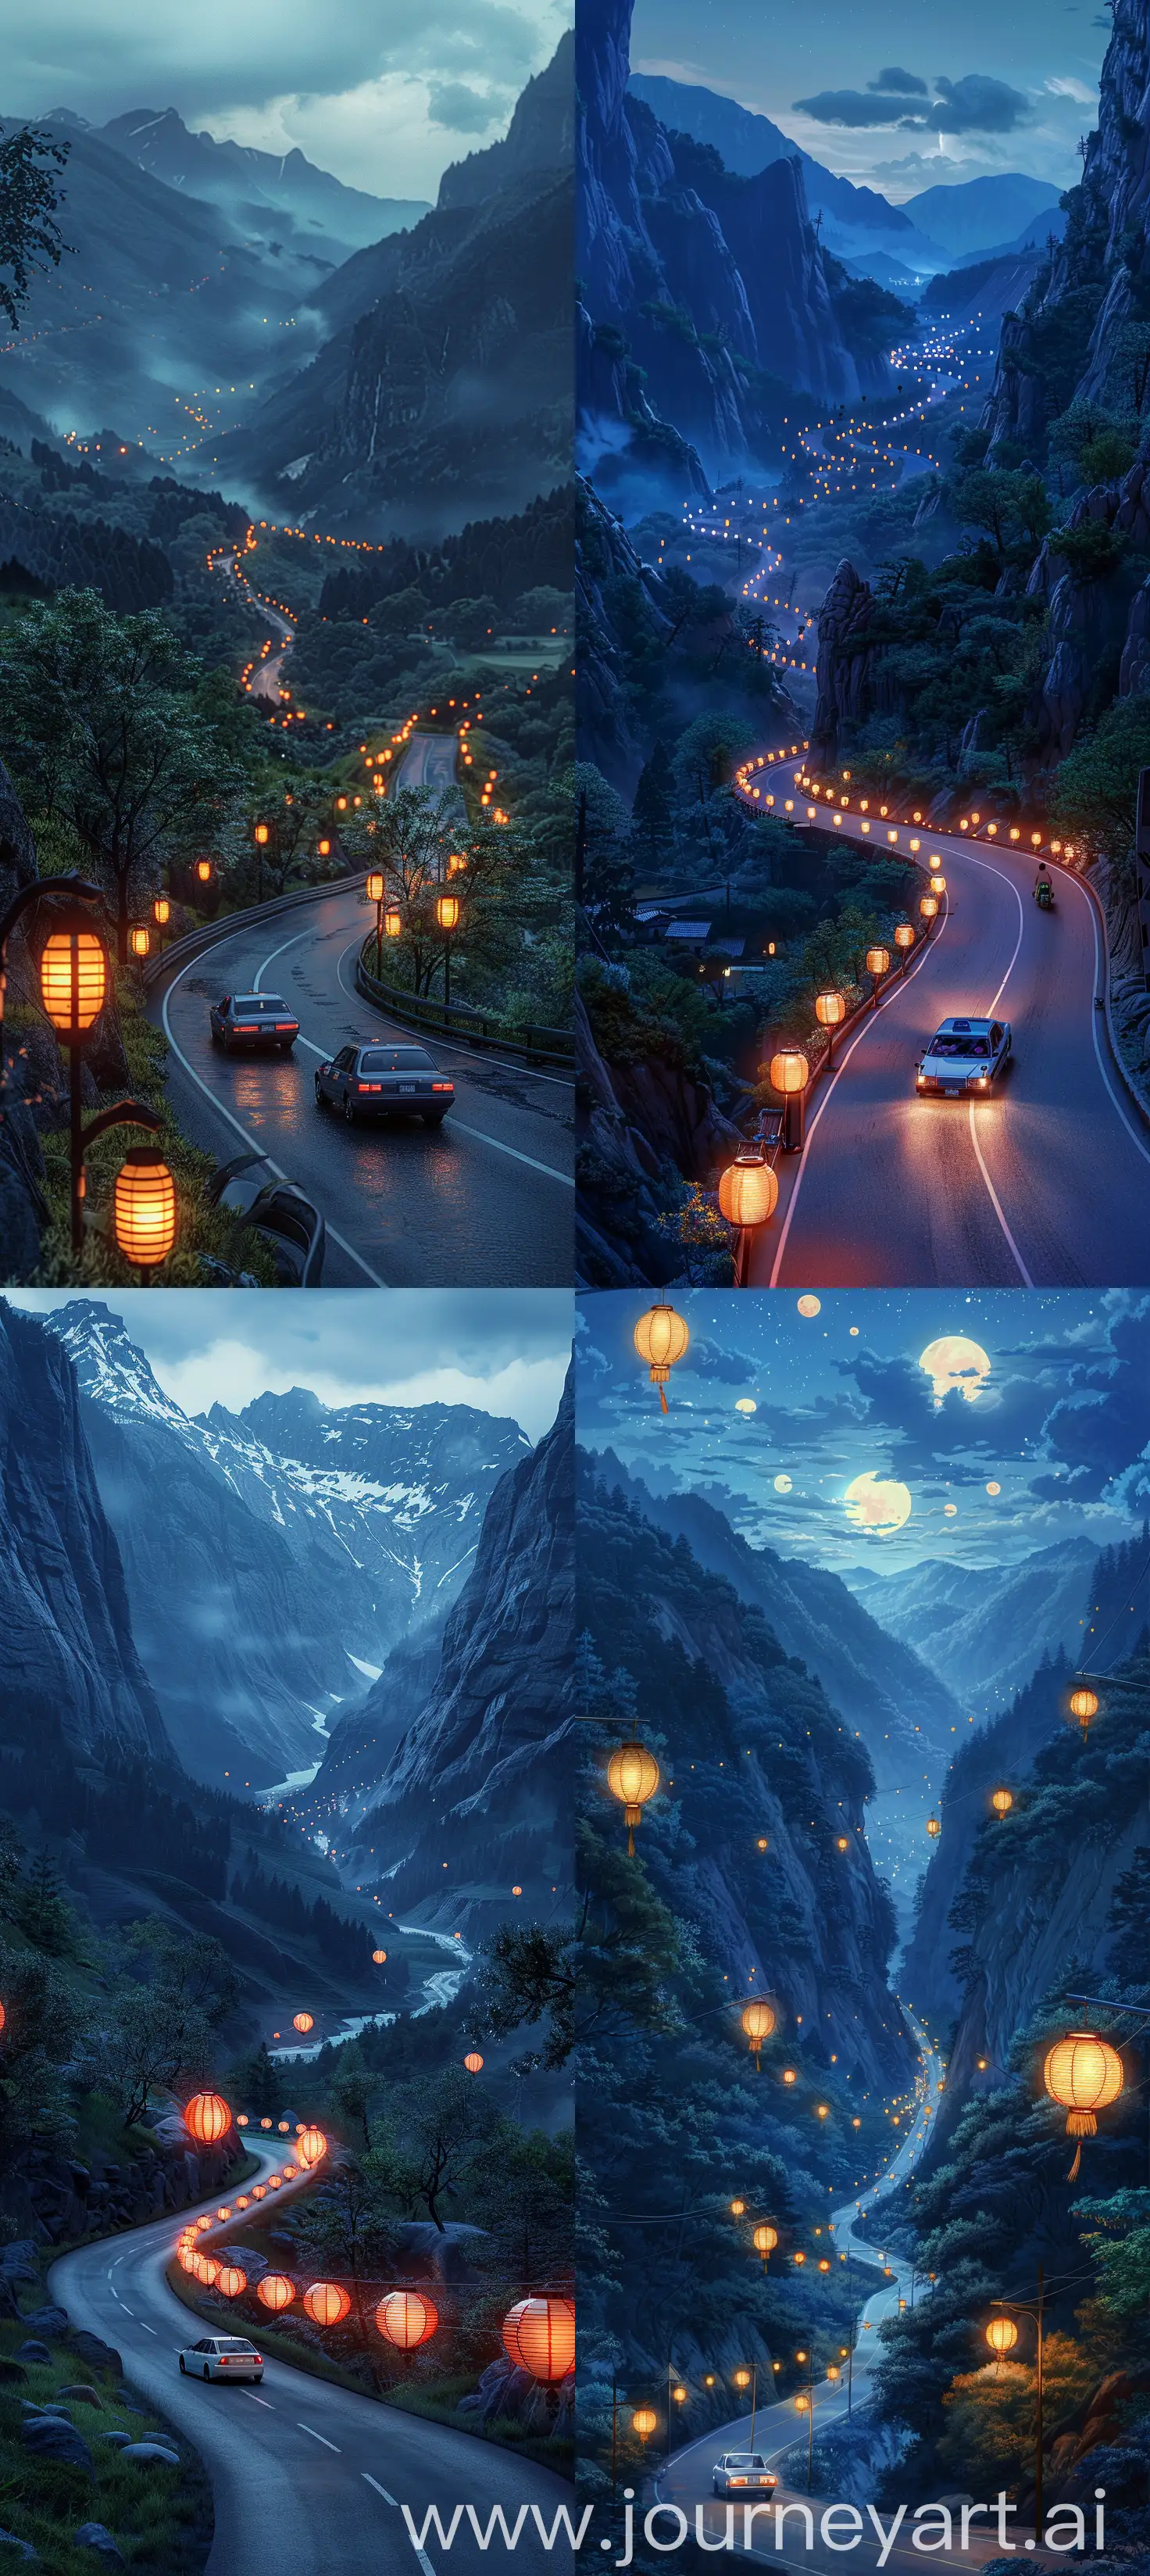  Ghibli studios aesthetic, serene mountain scenery at night, a solitary car cruising an empty winding road through a valley, roadside dotted with glowing Japanese lanterns, anime art style, peaceful yet mysterious atmosphere --ar 57:128 --s 300 --c 15 --v 6 --relax